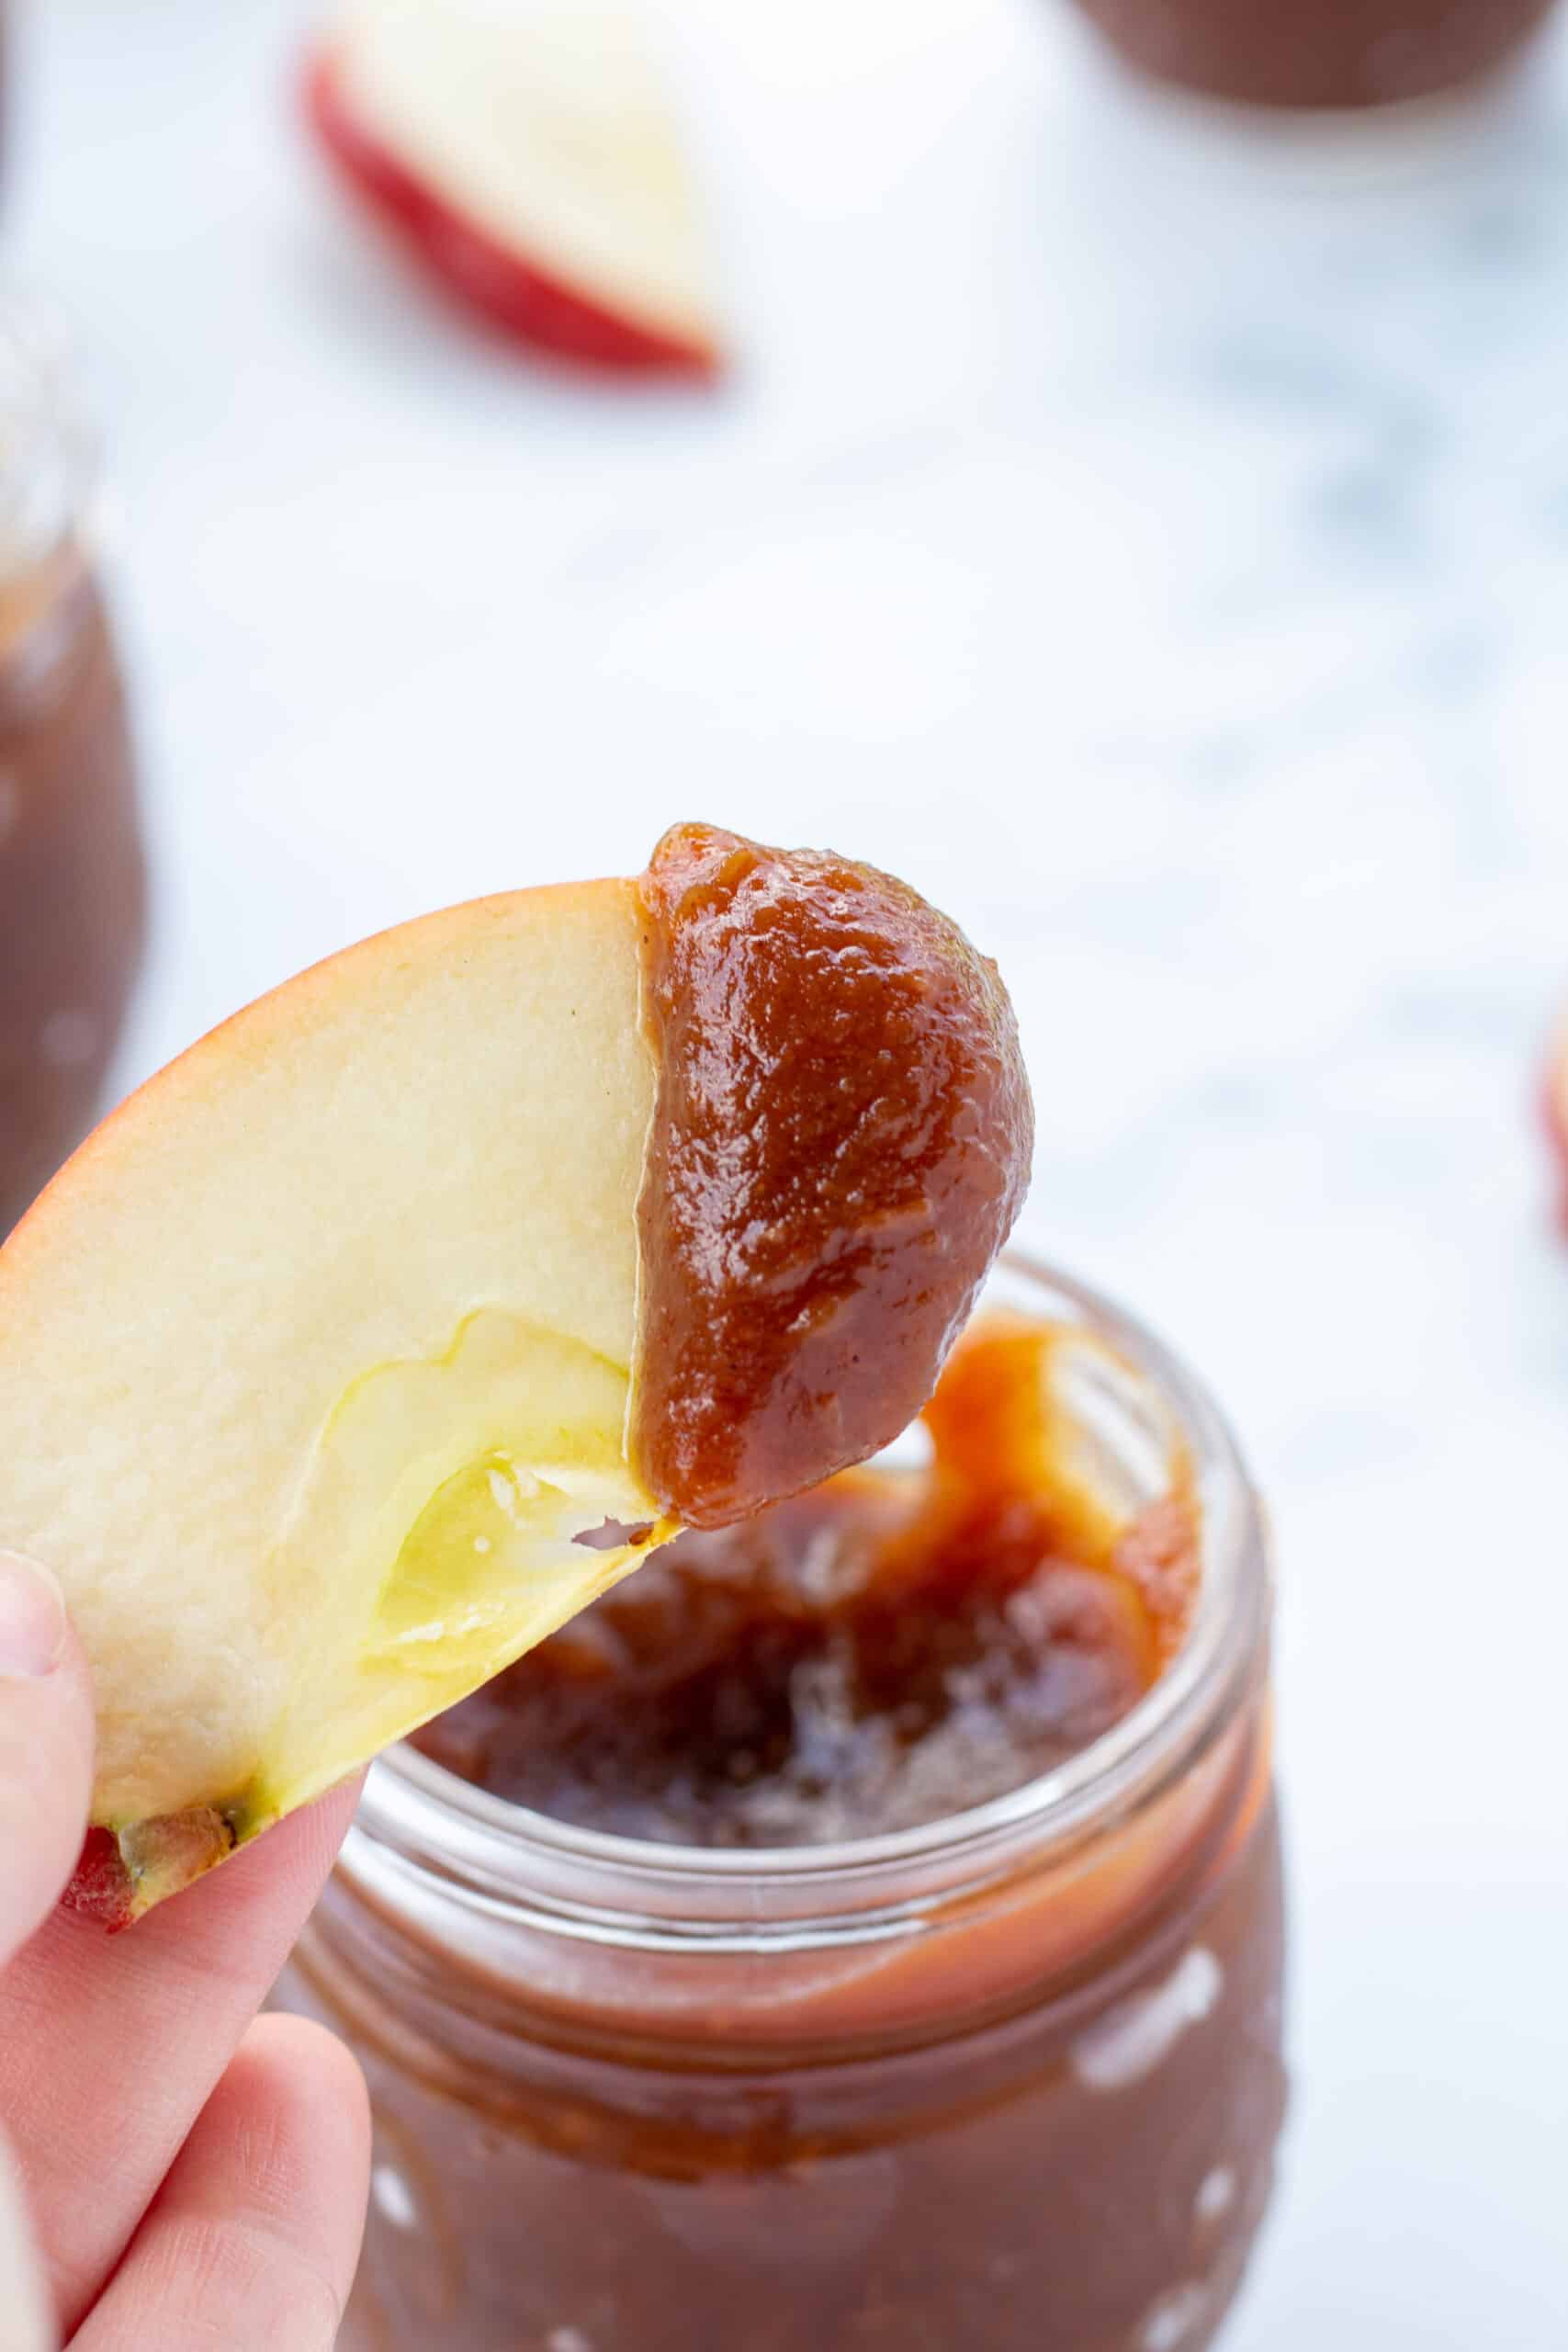 an apple slice dipped in apple butter held by a hand over a glass jar of apple butter